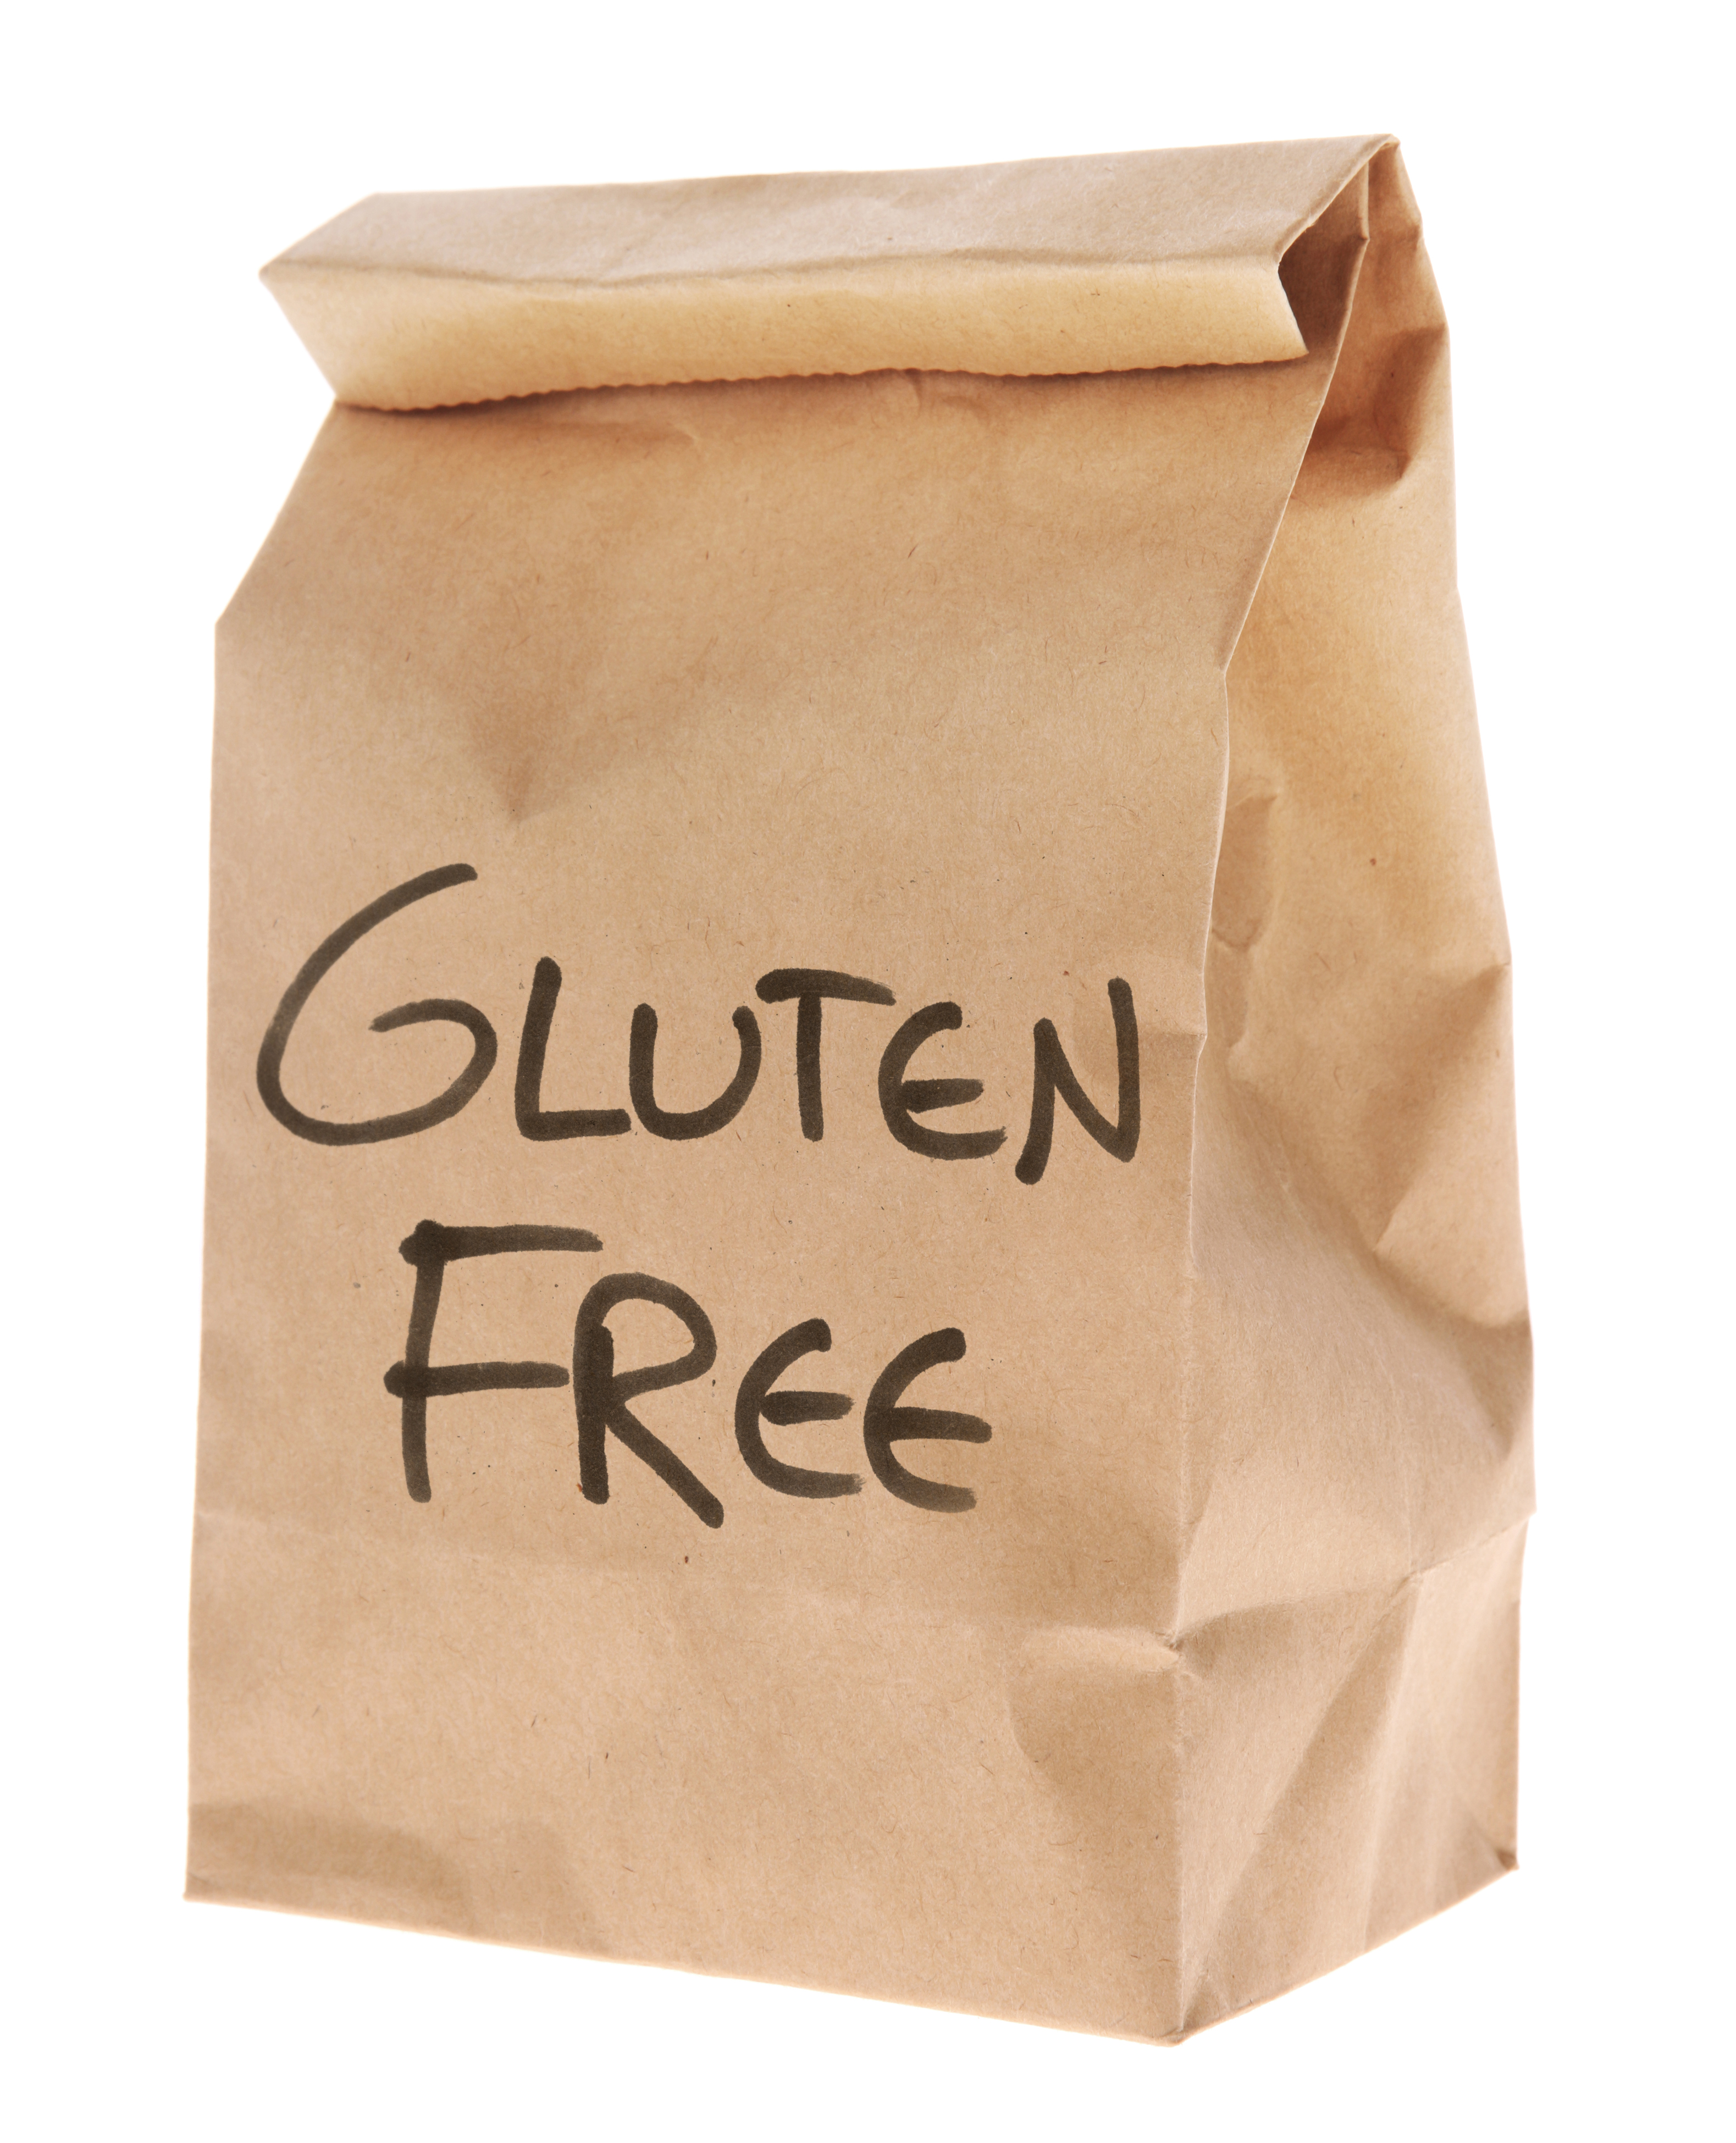 Top tips for adapting to a gluten-free lifestyle